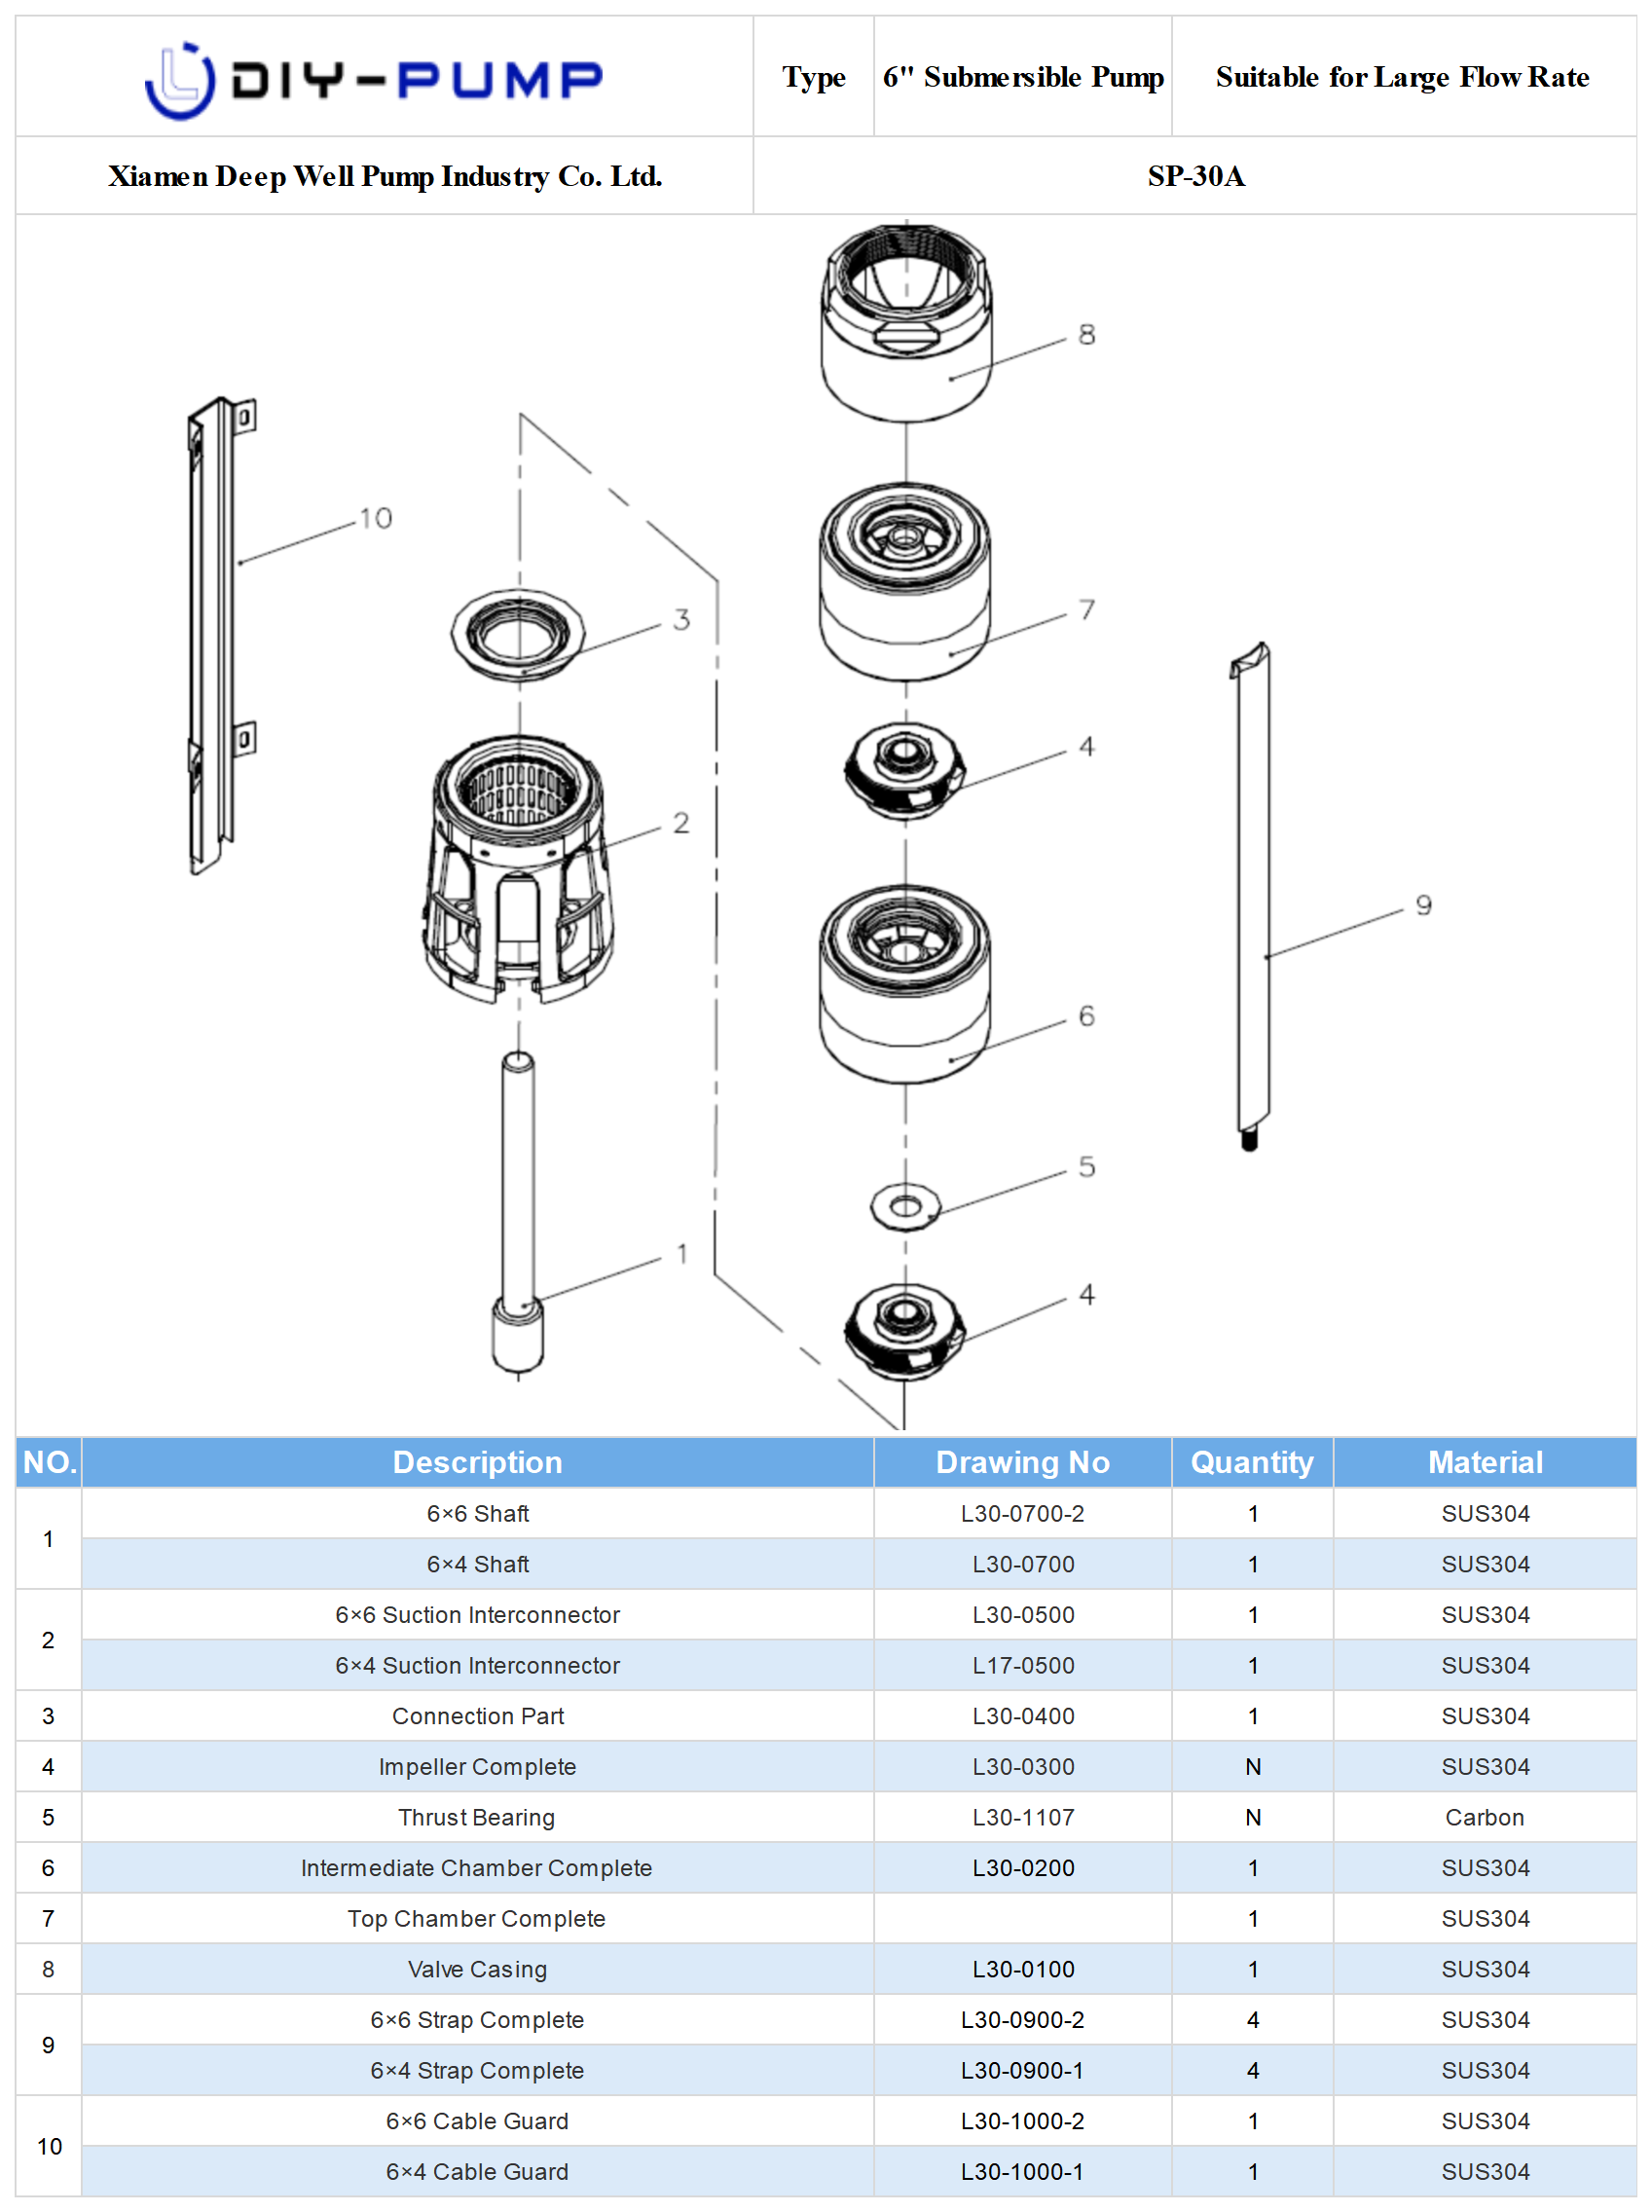 SP-30 Deep Well Submersible Pump Structure.png